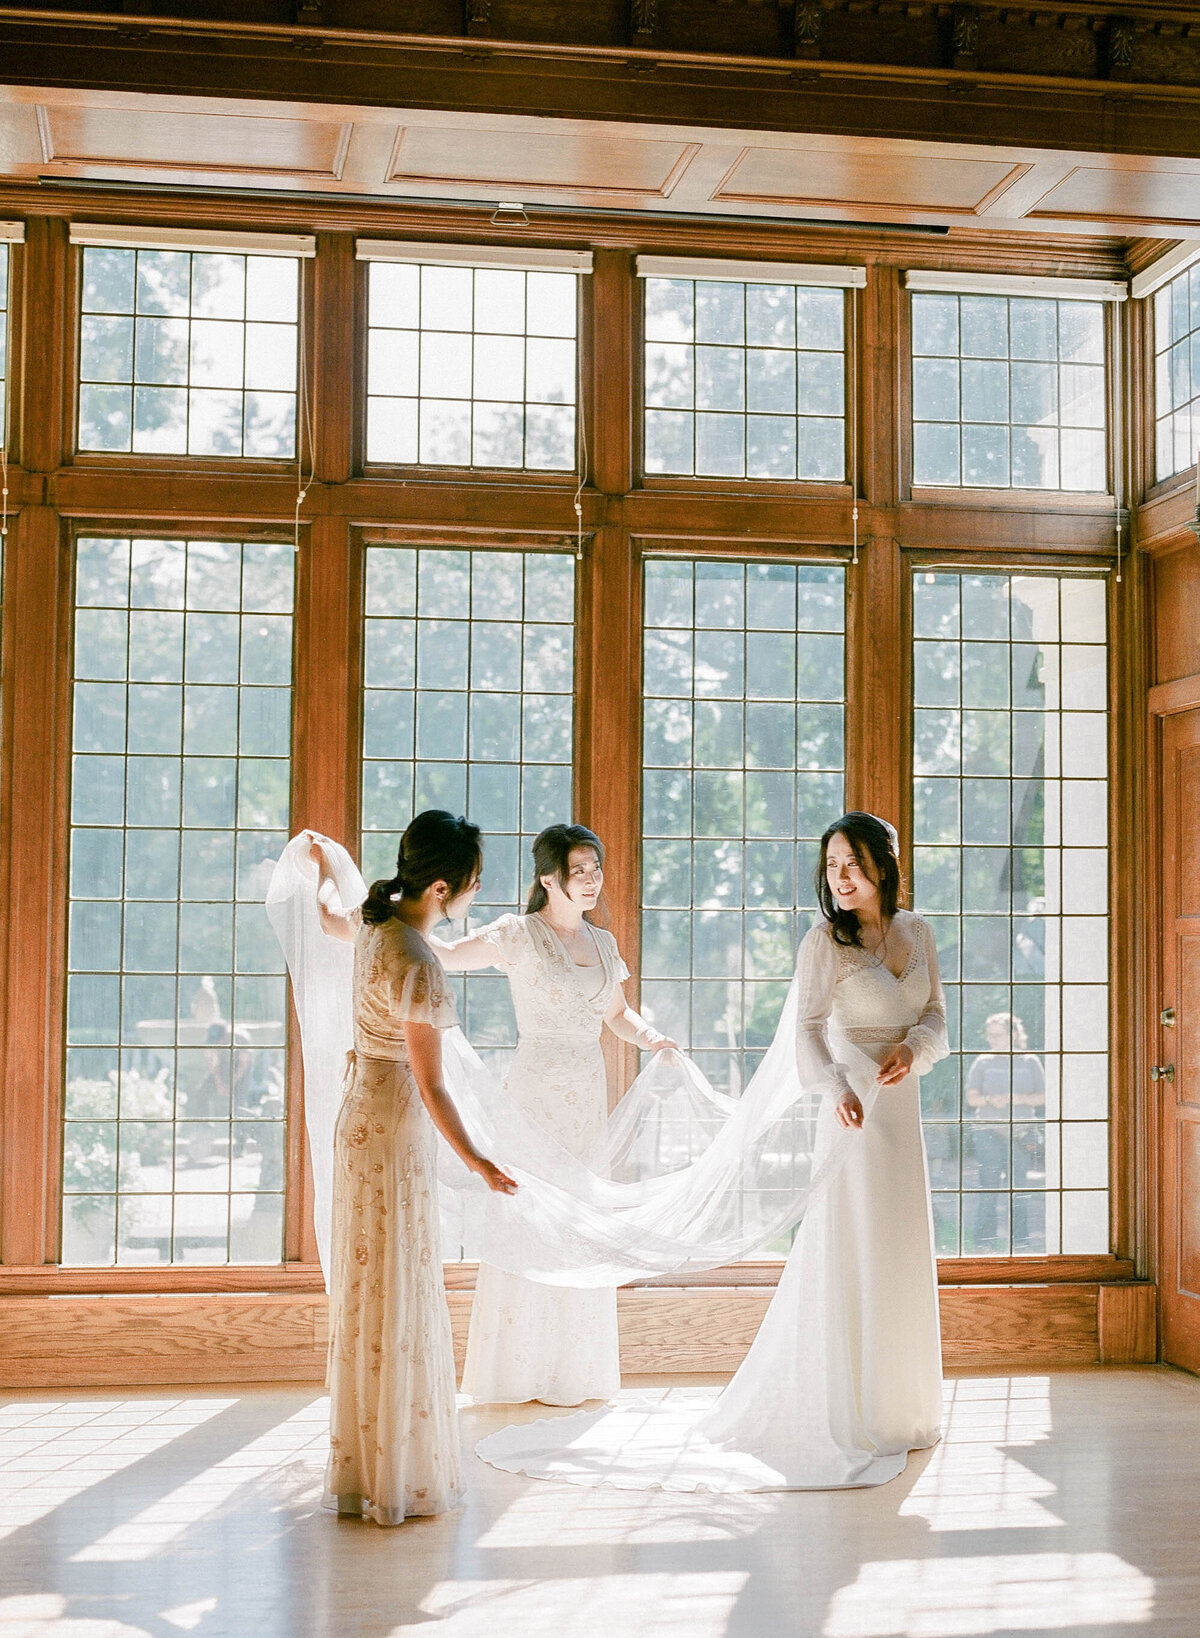 1 - Qi & Fengtao - Lairmont Manor - Kerry Jeanne Photography (53)